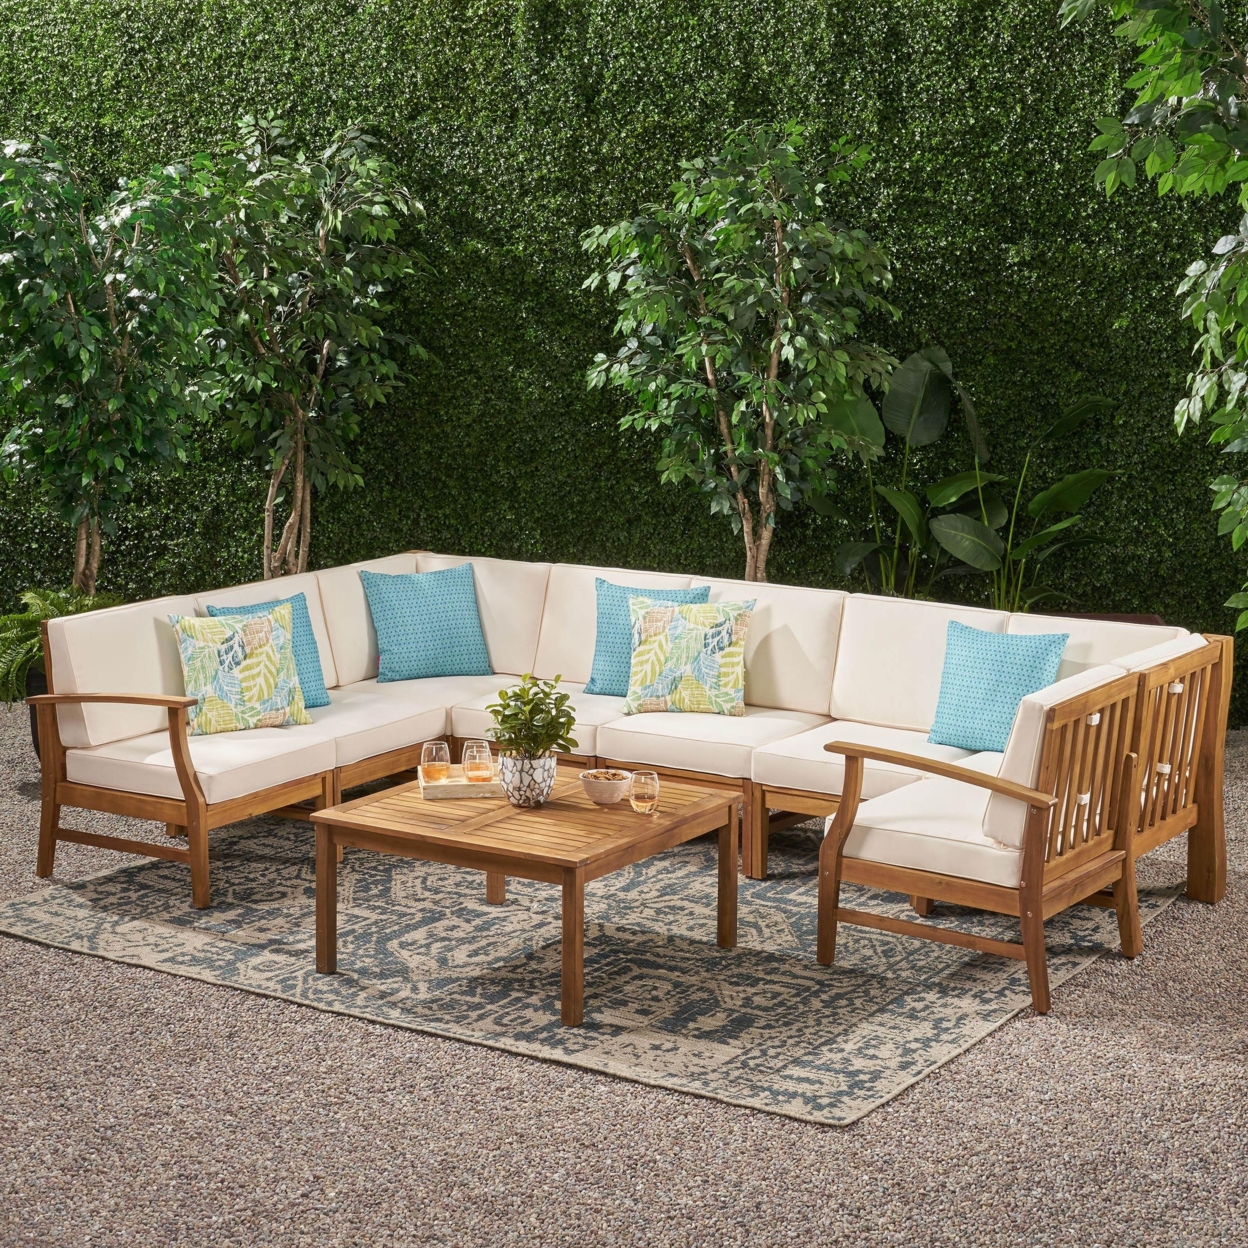 Scarlett Outdoor 8 Seat Teak Finished Acacia Wood Sectional Sofa And Table Set - Blue